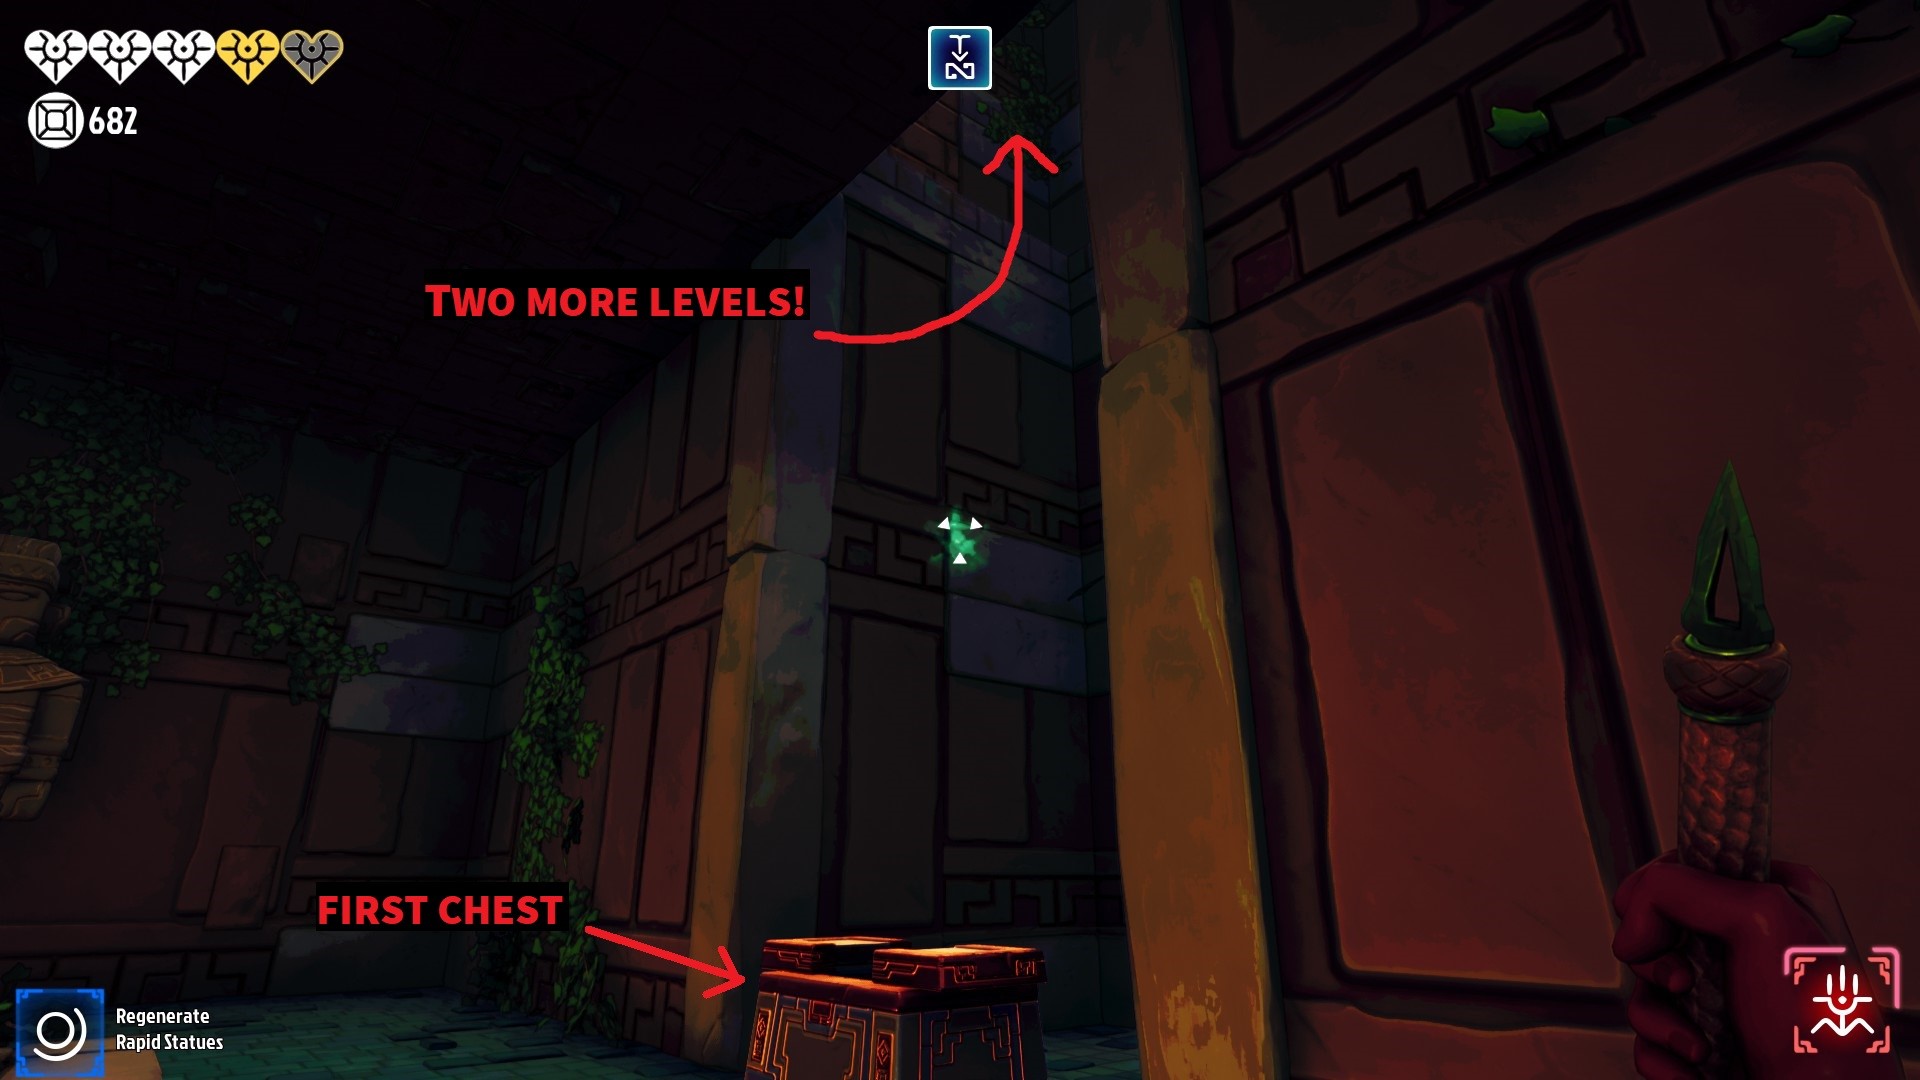 Phantom Gameplay Tips and All Hidden Chest Locations Guide